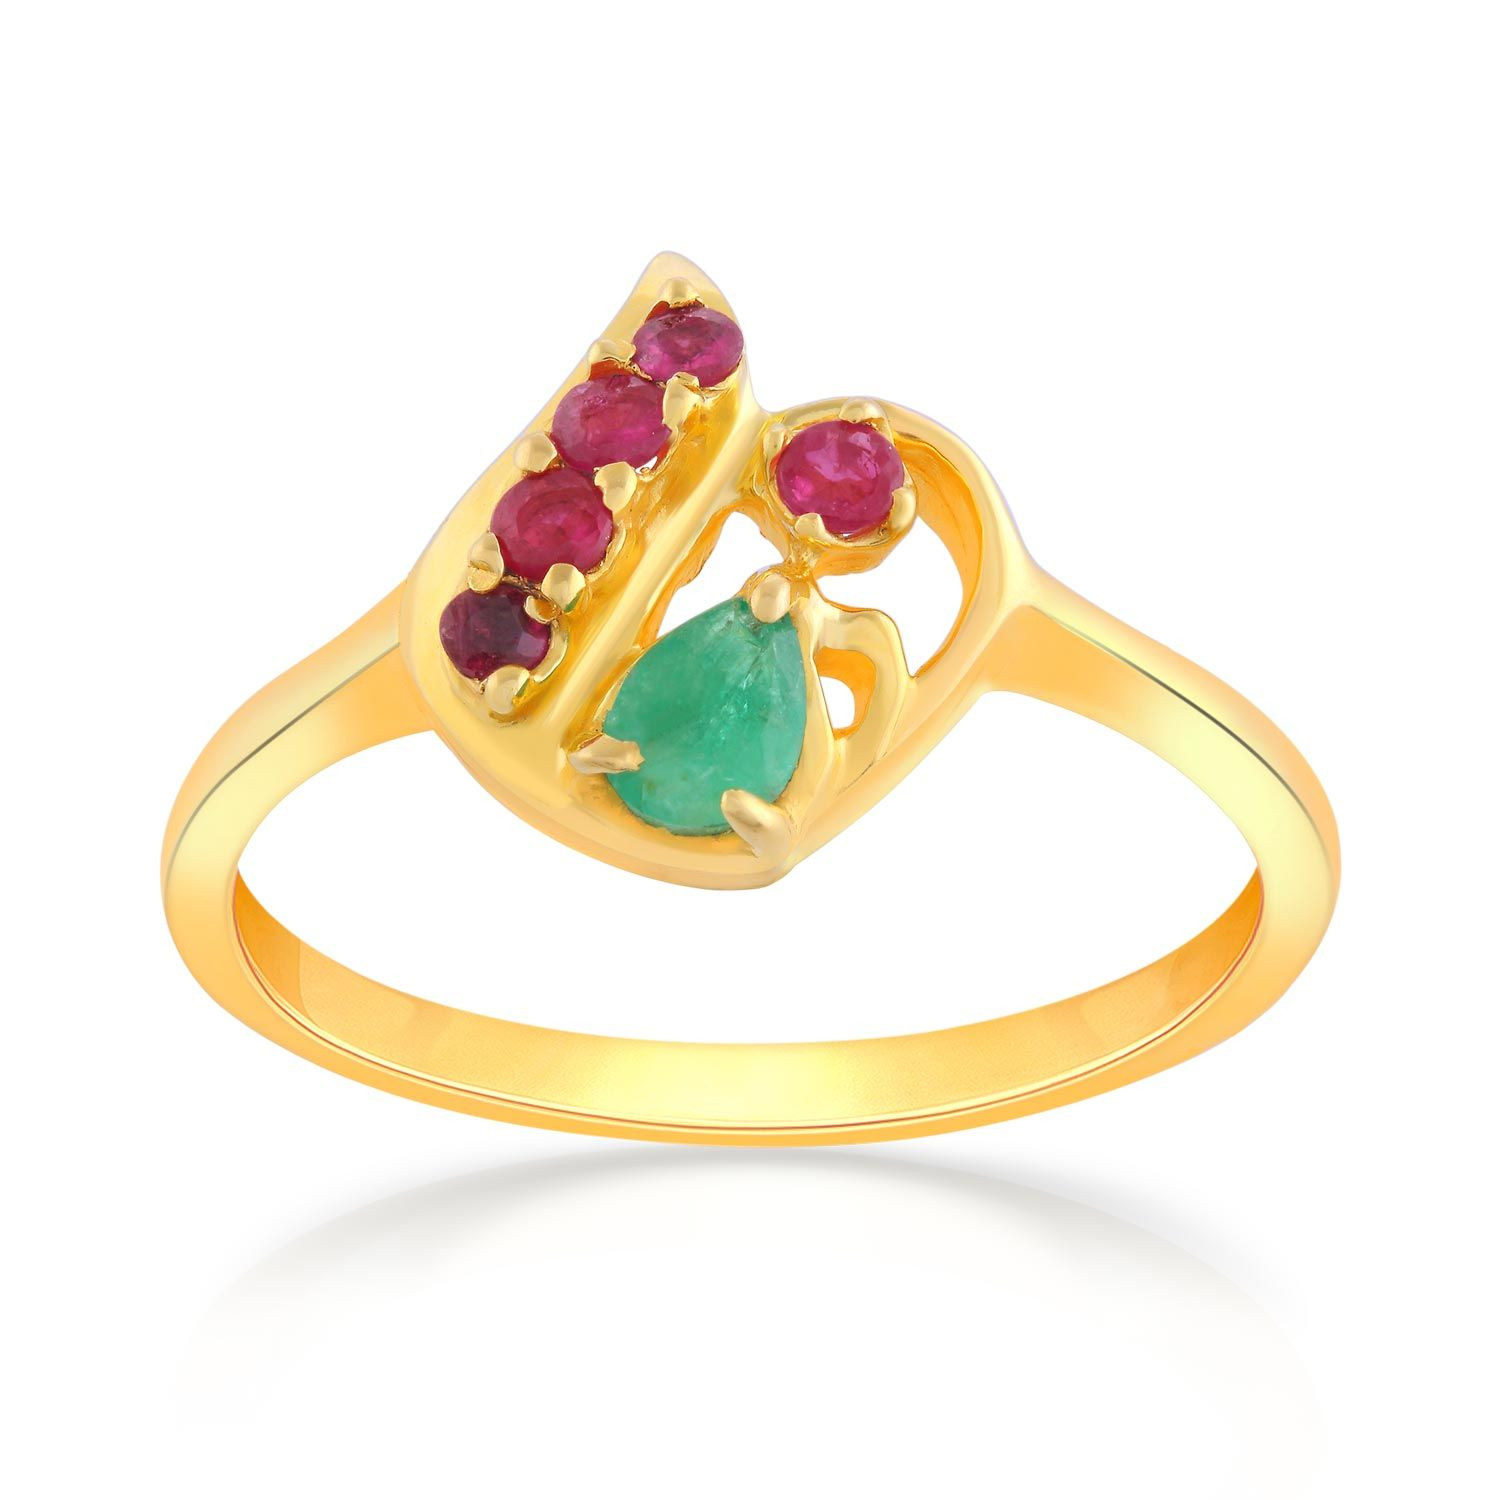 Better Looking Gold Yellow Sapphire Stone Ring